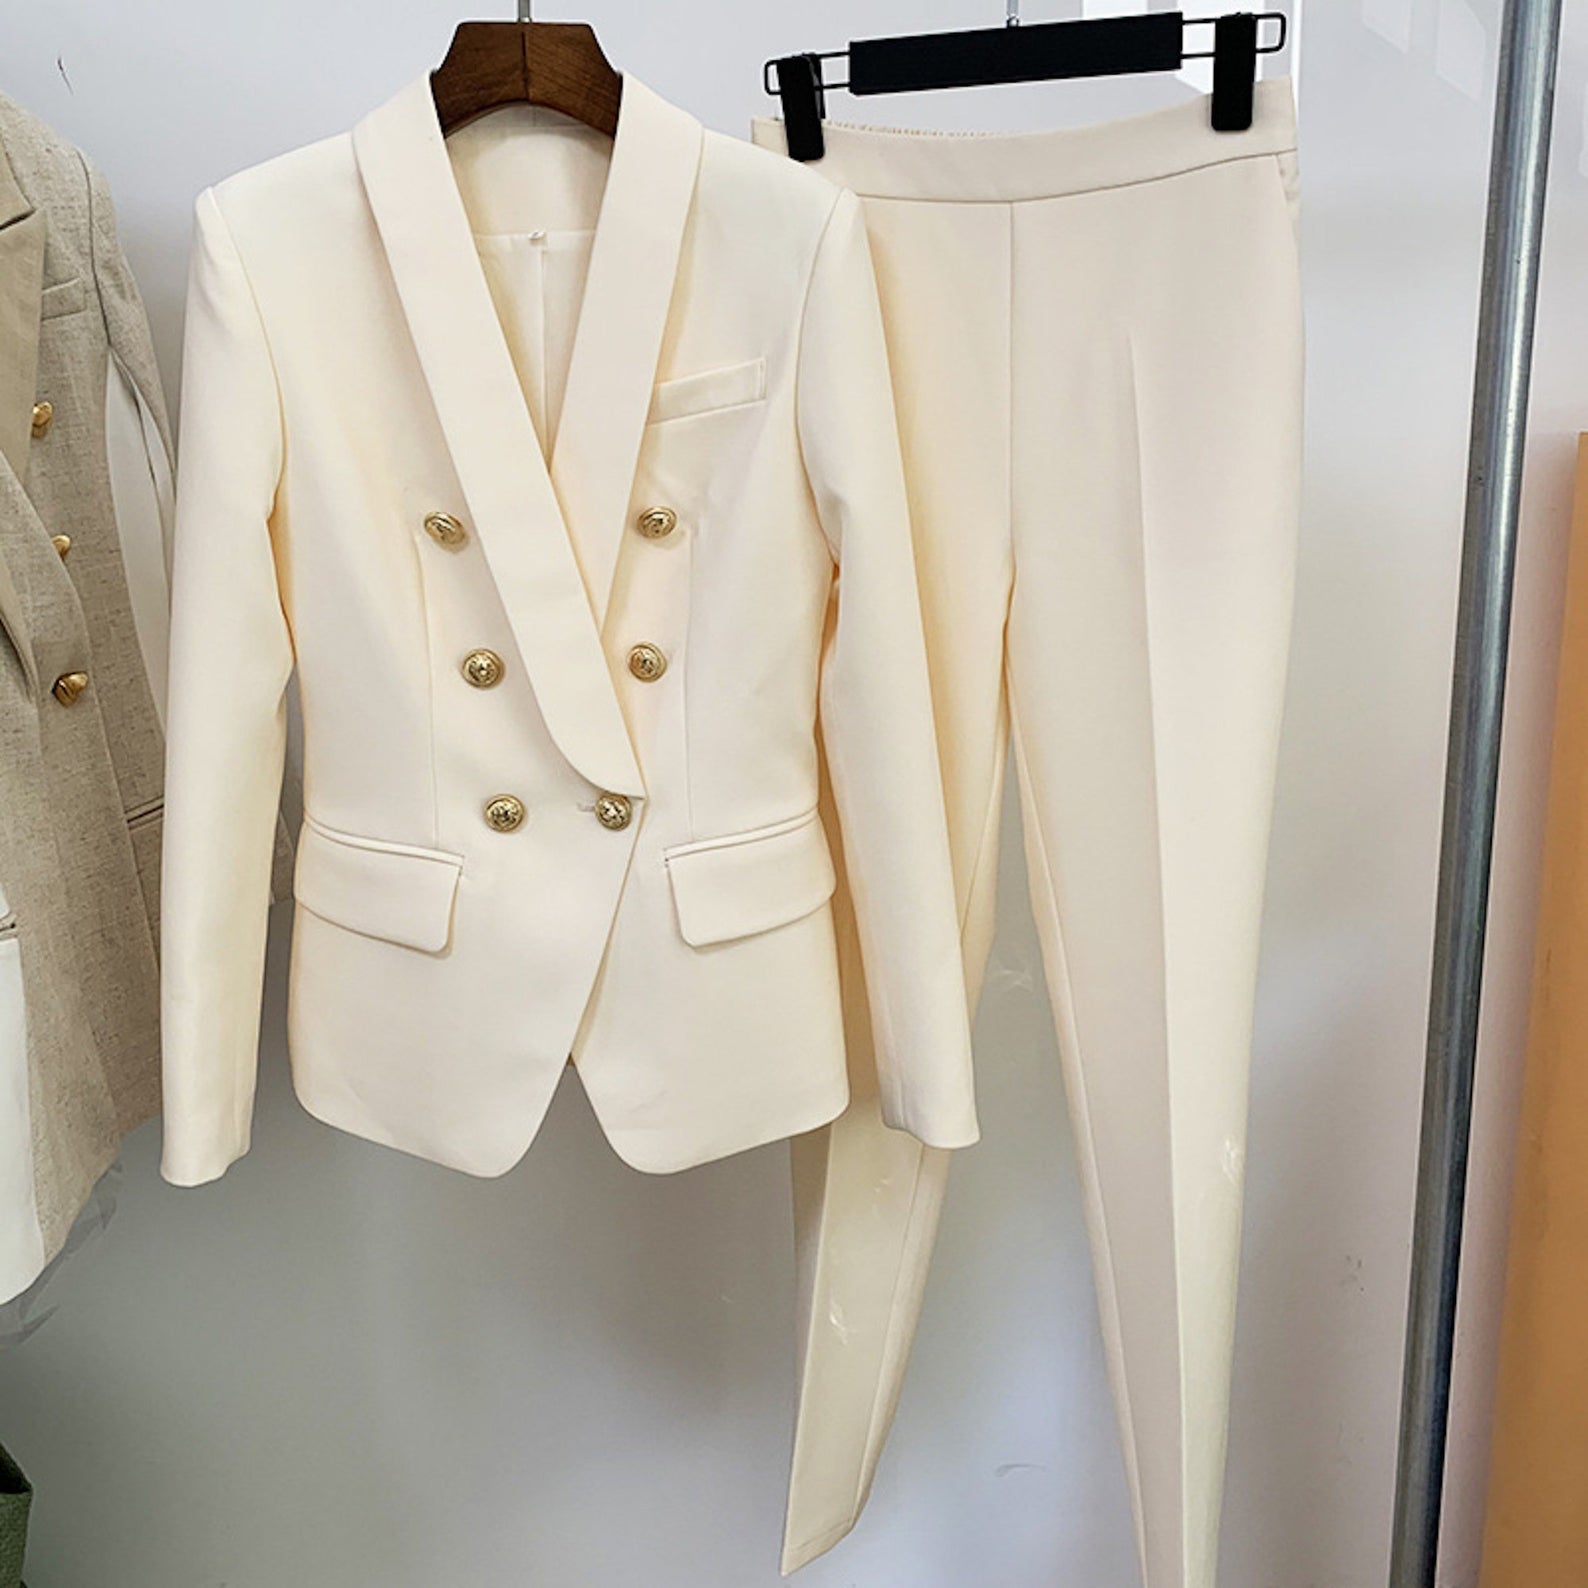 White Blazer Shawl Collar Golden Buttons + Crop Trousers Suit 3 for Women Quick International Service!  Blazer Shawl Collar Golden Buttons + Crop Trousers Suit 3 Colours, can wear it for College Inaugurations, Ceremony and Official use. The comfort of our ladies tailored suits are unsurpassed, as is the confidence it can provide its wearer in knowing that they are looking at their absolute best.